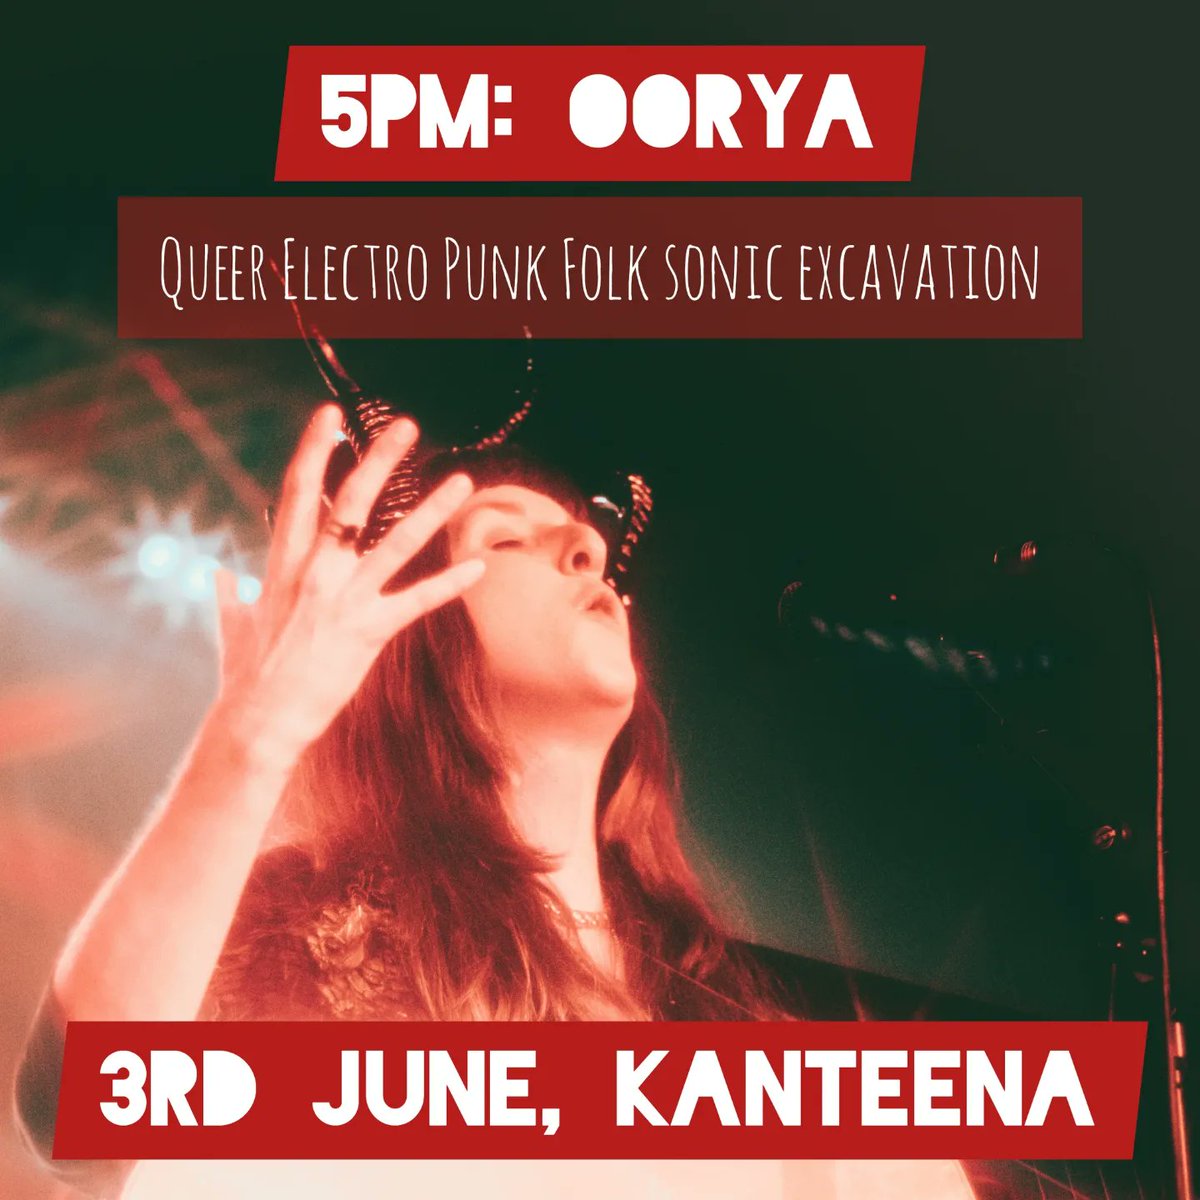 At 5pm the 'breathtaking' queer electro folk punk sonic experience of @OORYA4 will transcend you into the mycelium with the assistance of Eon the support dinosaur. NOT TO BE MISSED 🦕